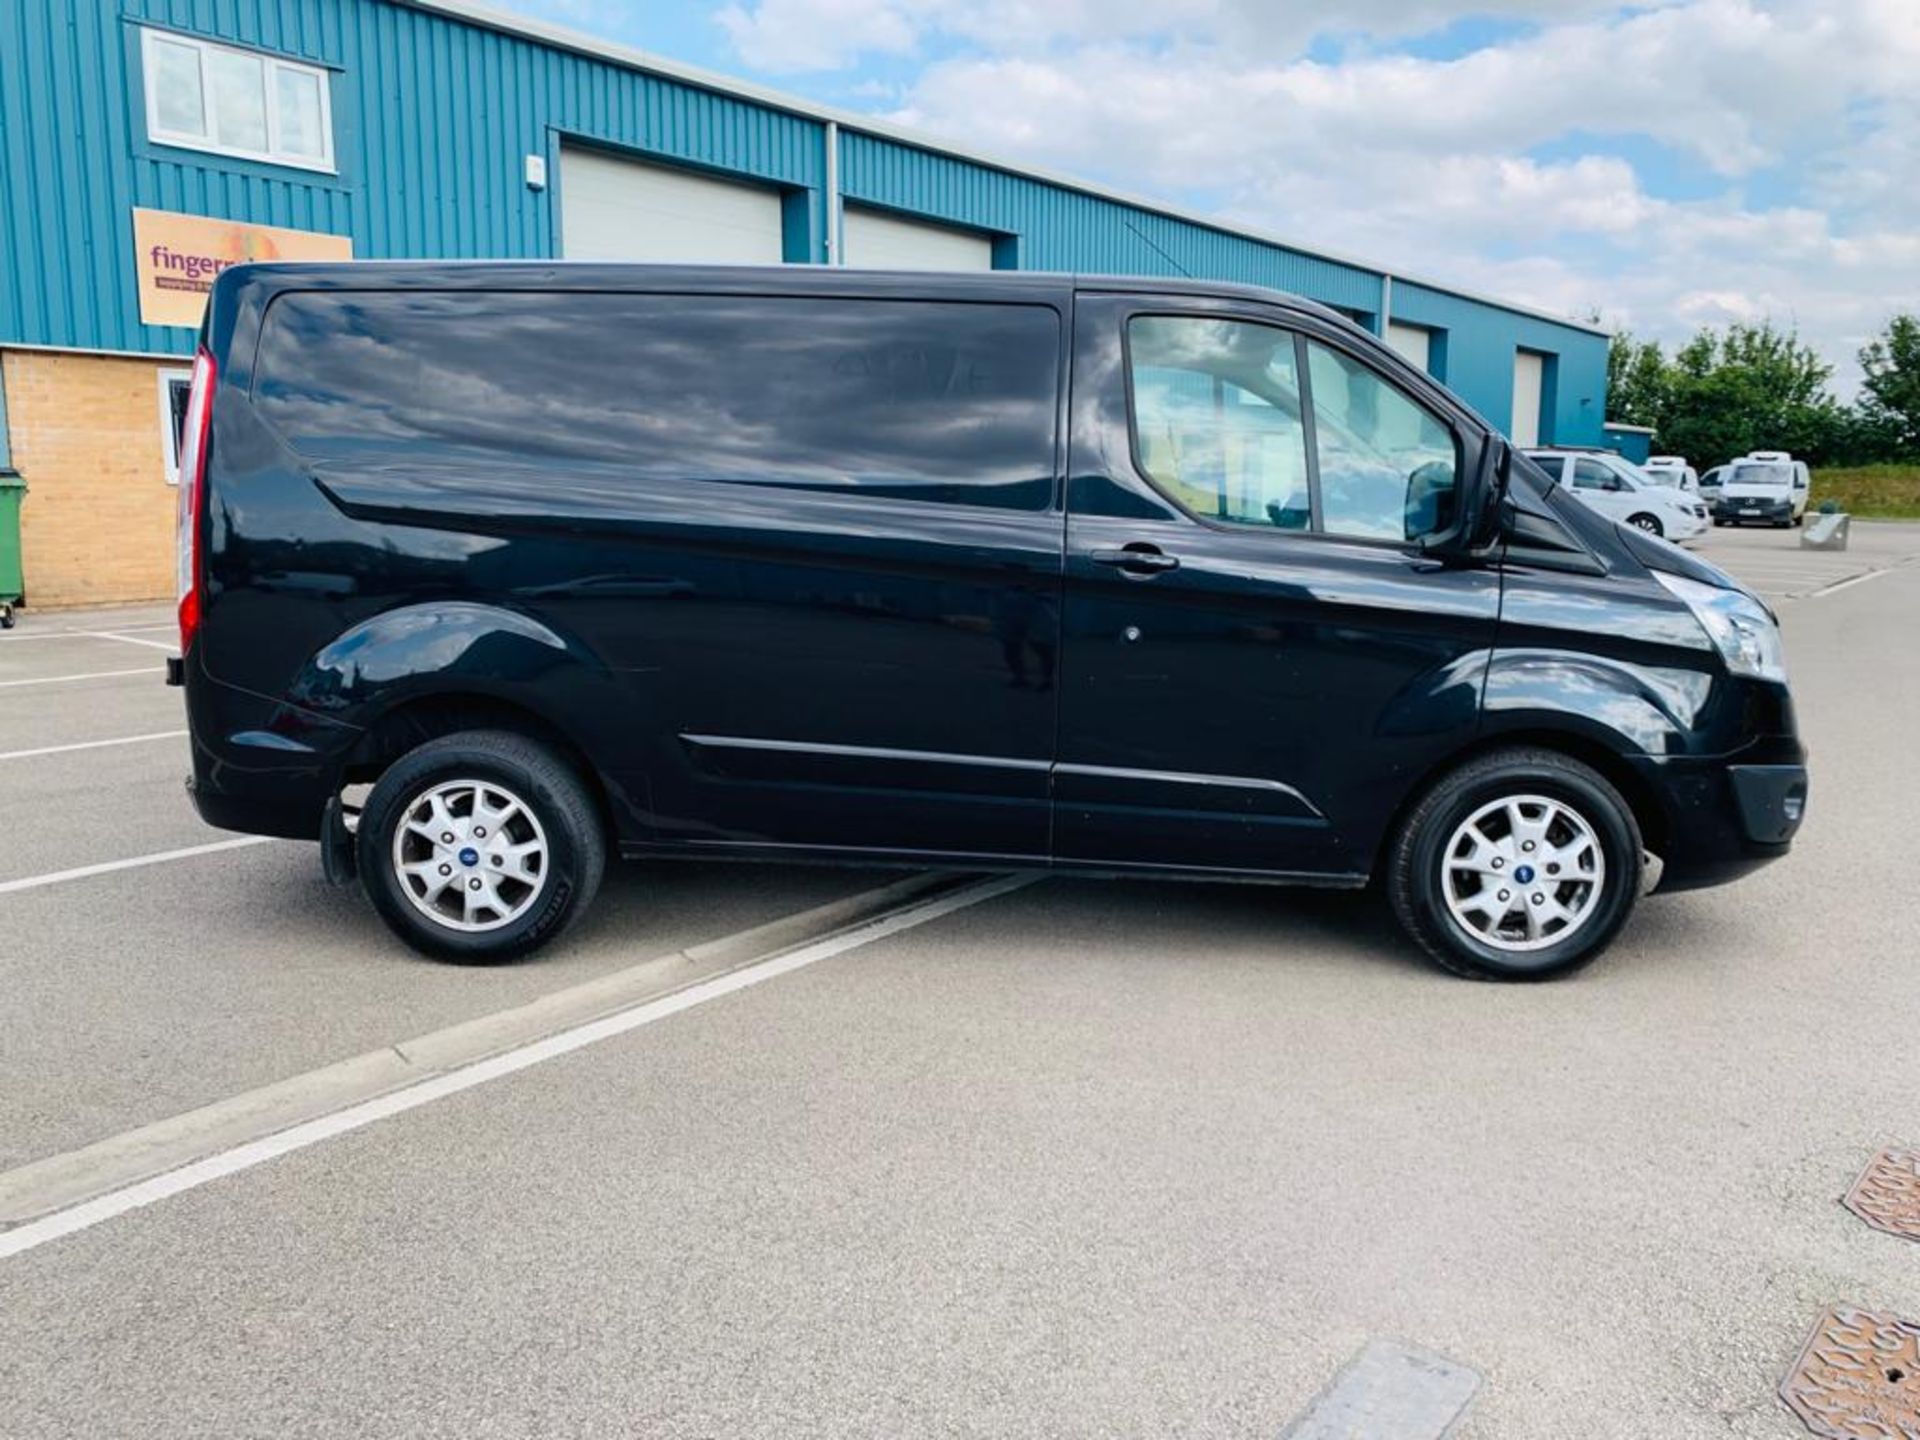 Ford Transit 2.2 TDCI Custom 270 Limited 2015 Model 6 Speed - Air Con - Park Assist - Image 6 of 26